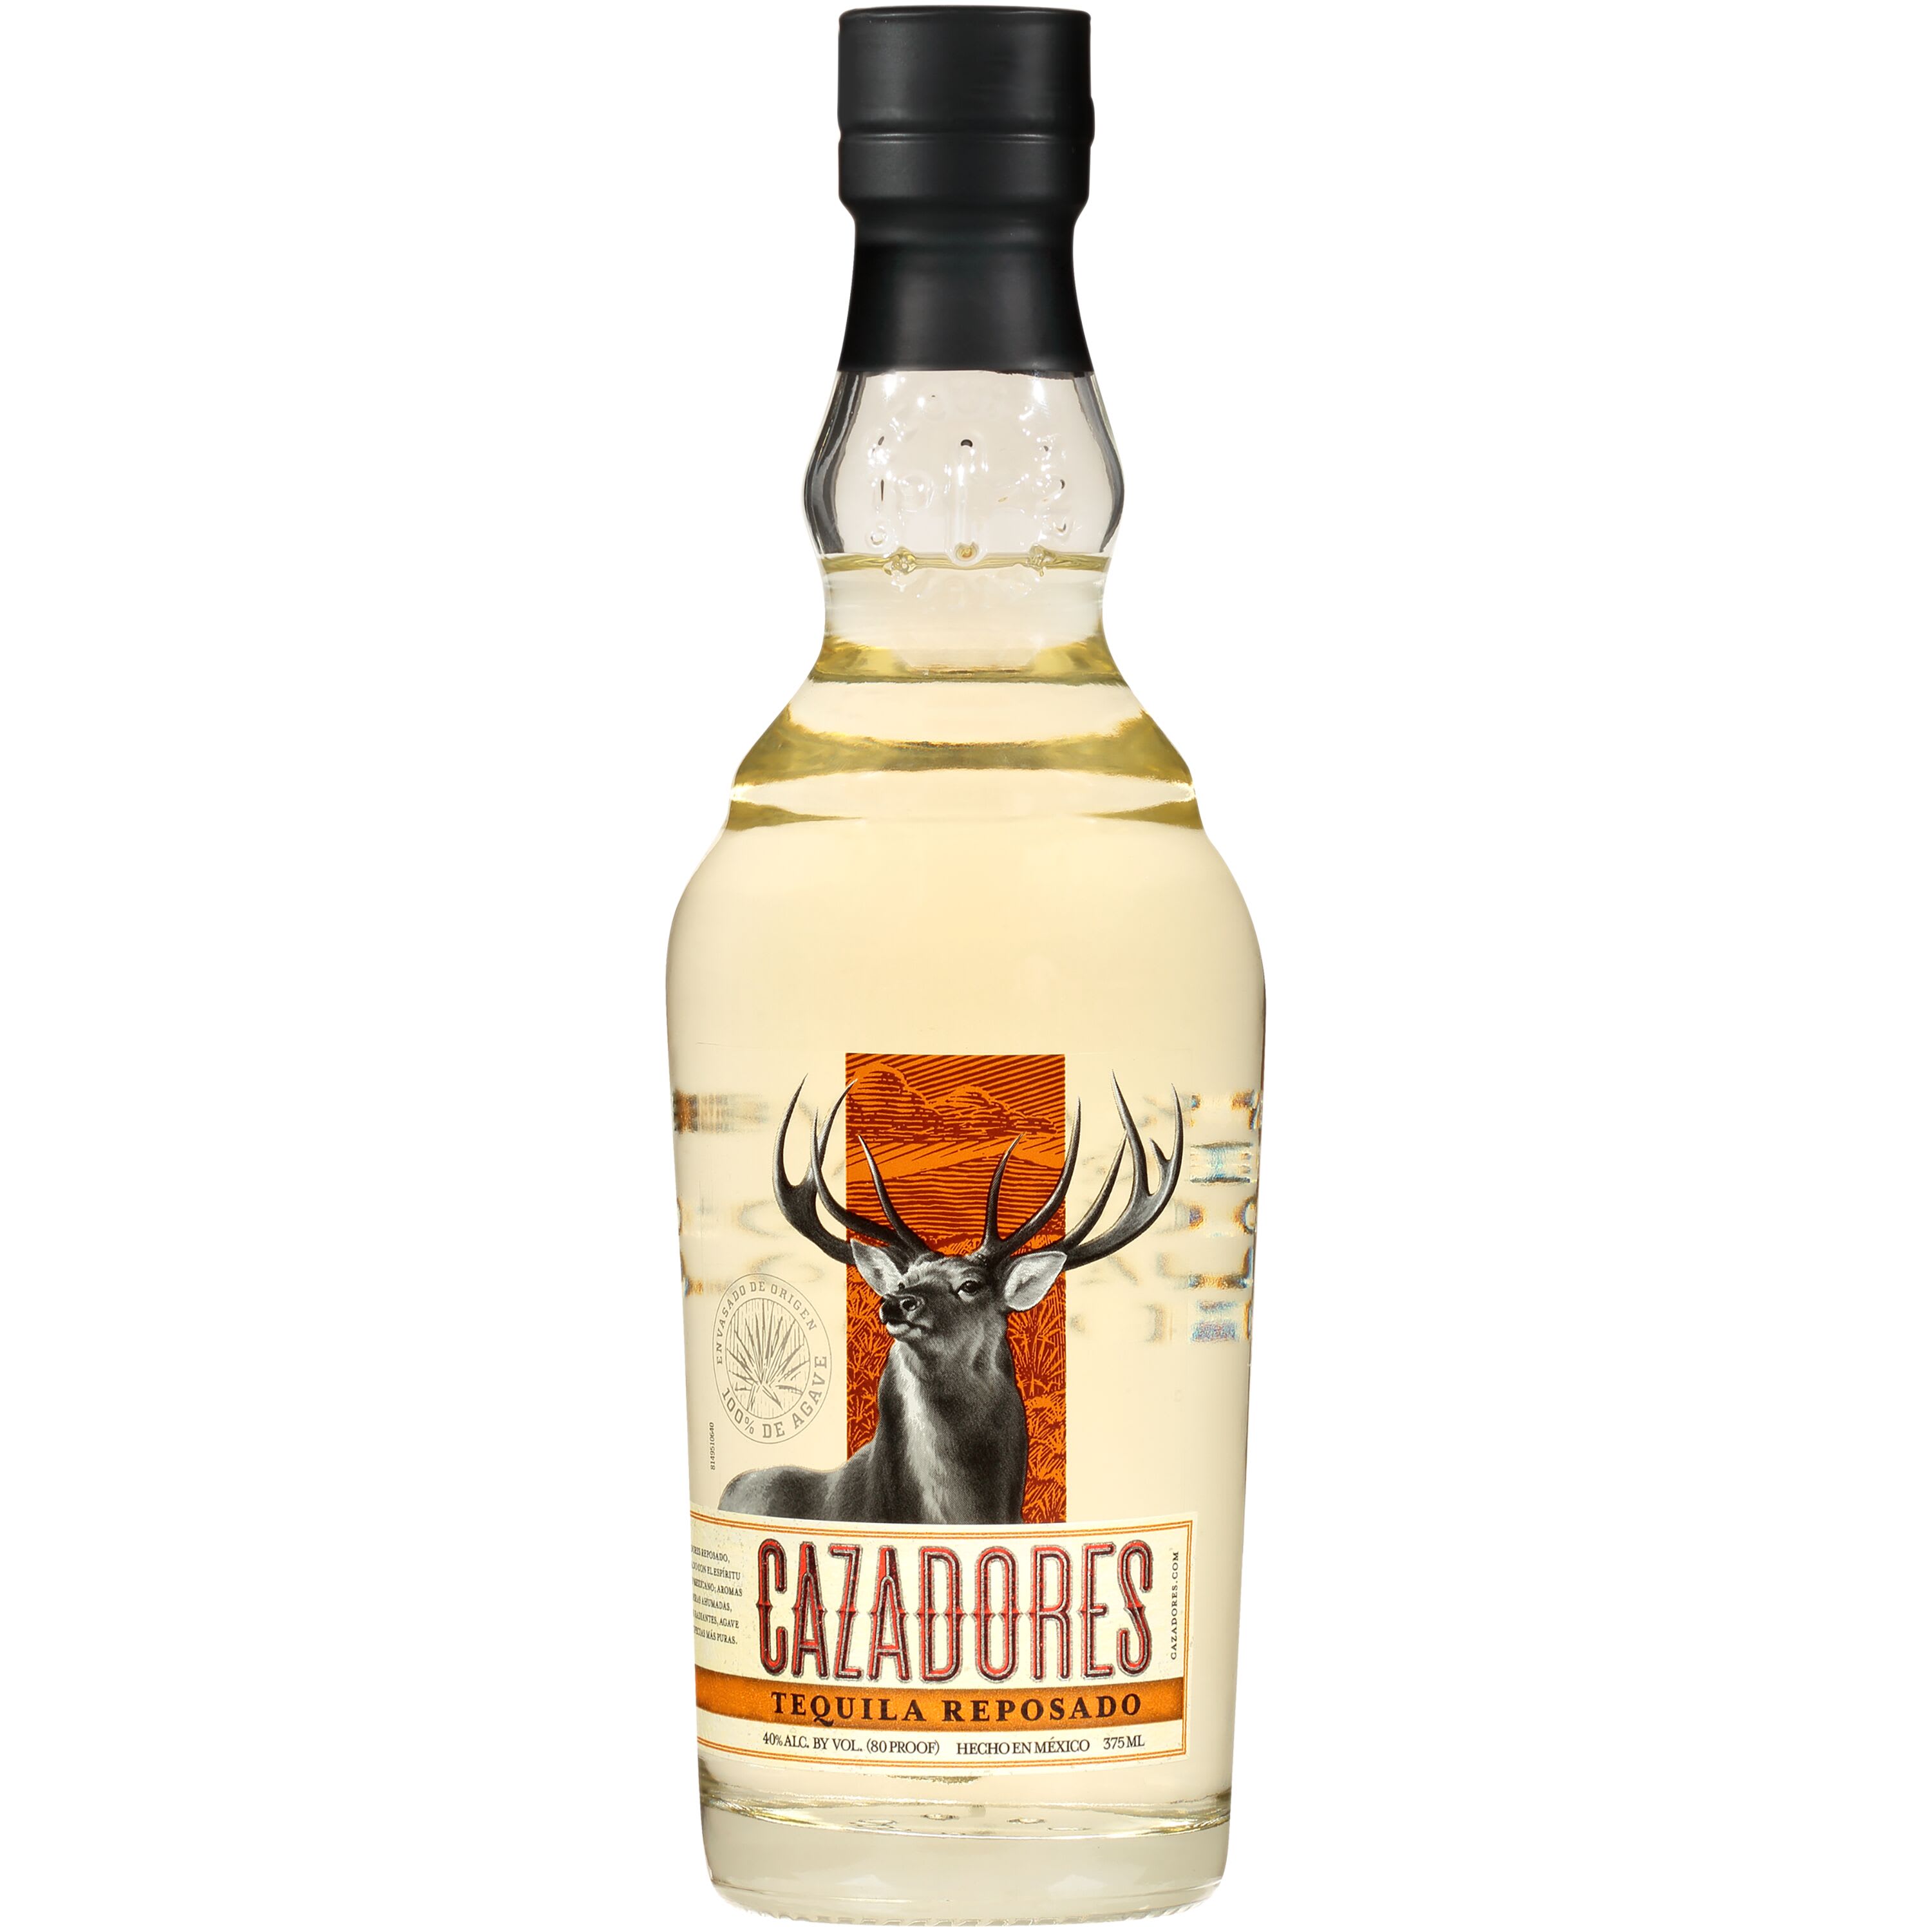 Cazadores Reposado Tequila - 375ml Bottle Delivery” /></p><div class='code-block code-block-2' style='margin: 8px 0; clear: both;'>
<style> #M901749ScriptRootC1499877 { min-height: 300px; }</style>
<!-- Composite Start -->
    <div id=